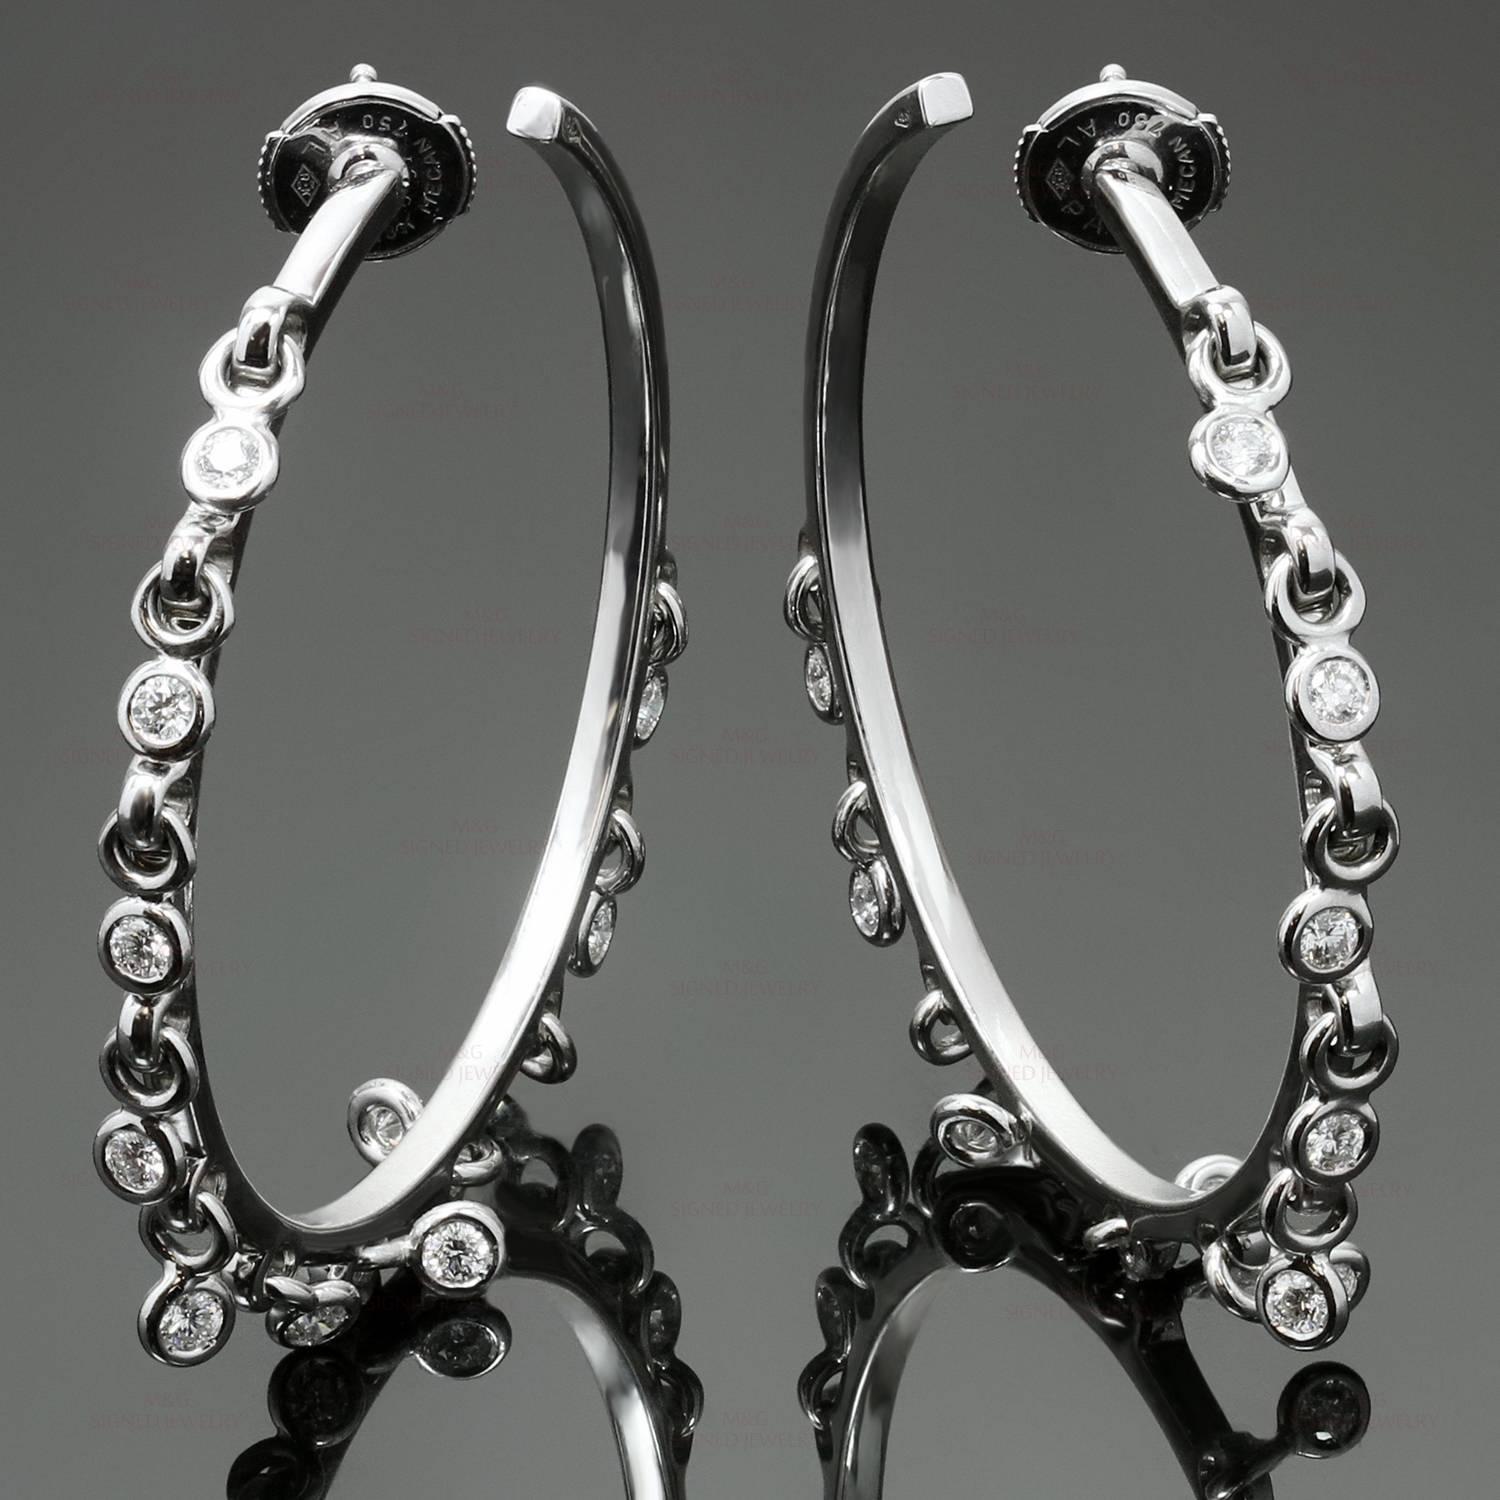 These gorgeous Christian Dior hoop earrings are crafted in 18k white gold and feature dangling hoops bezel-set with brilliant-cut round diamonds of an estimated 1.20 carats. Made in France circa 2000s. Measurements: 1.73